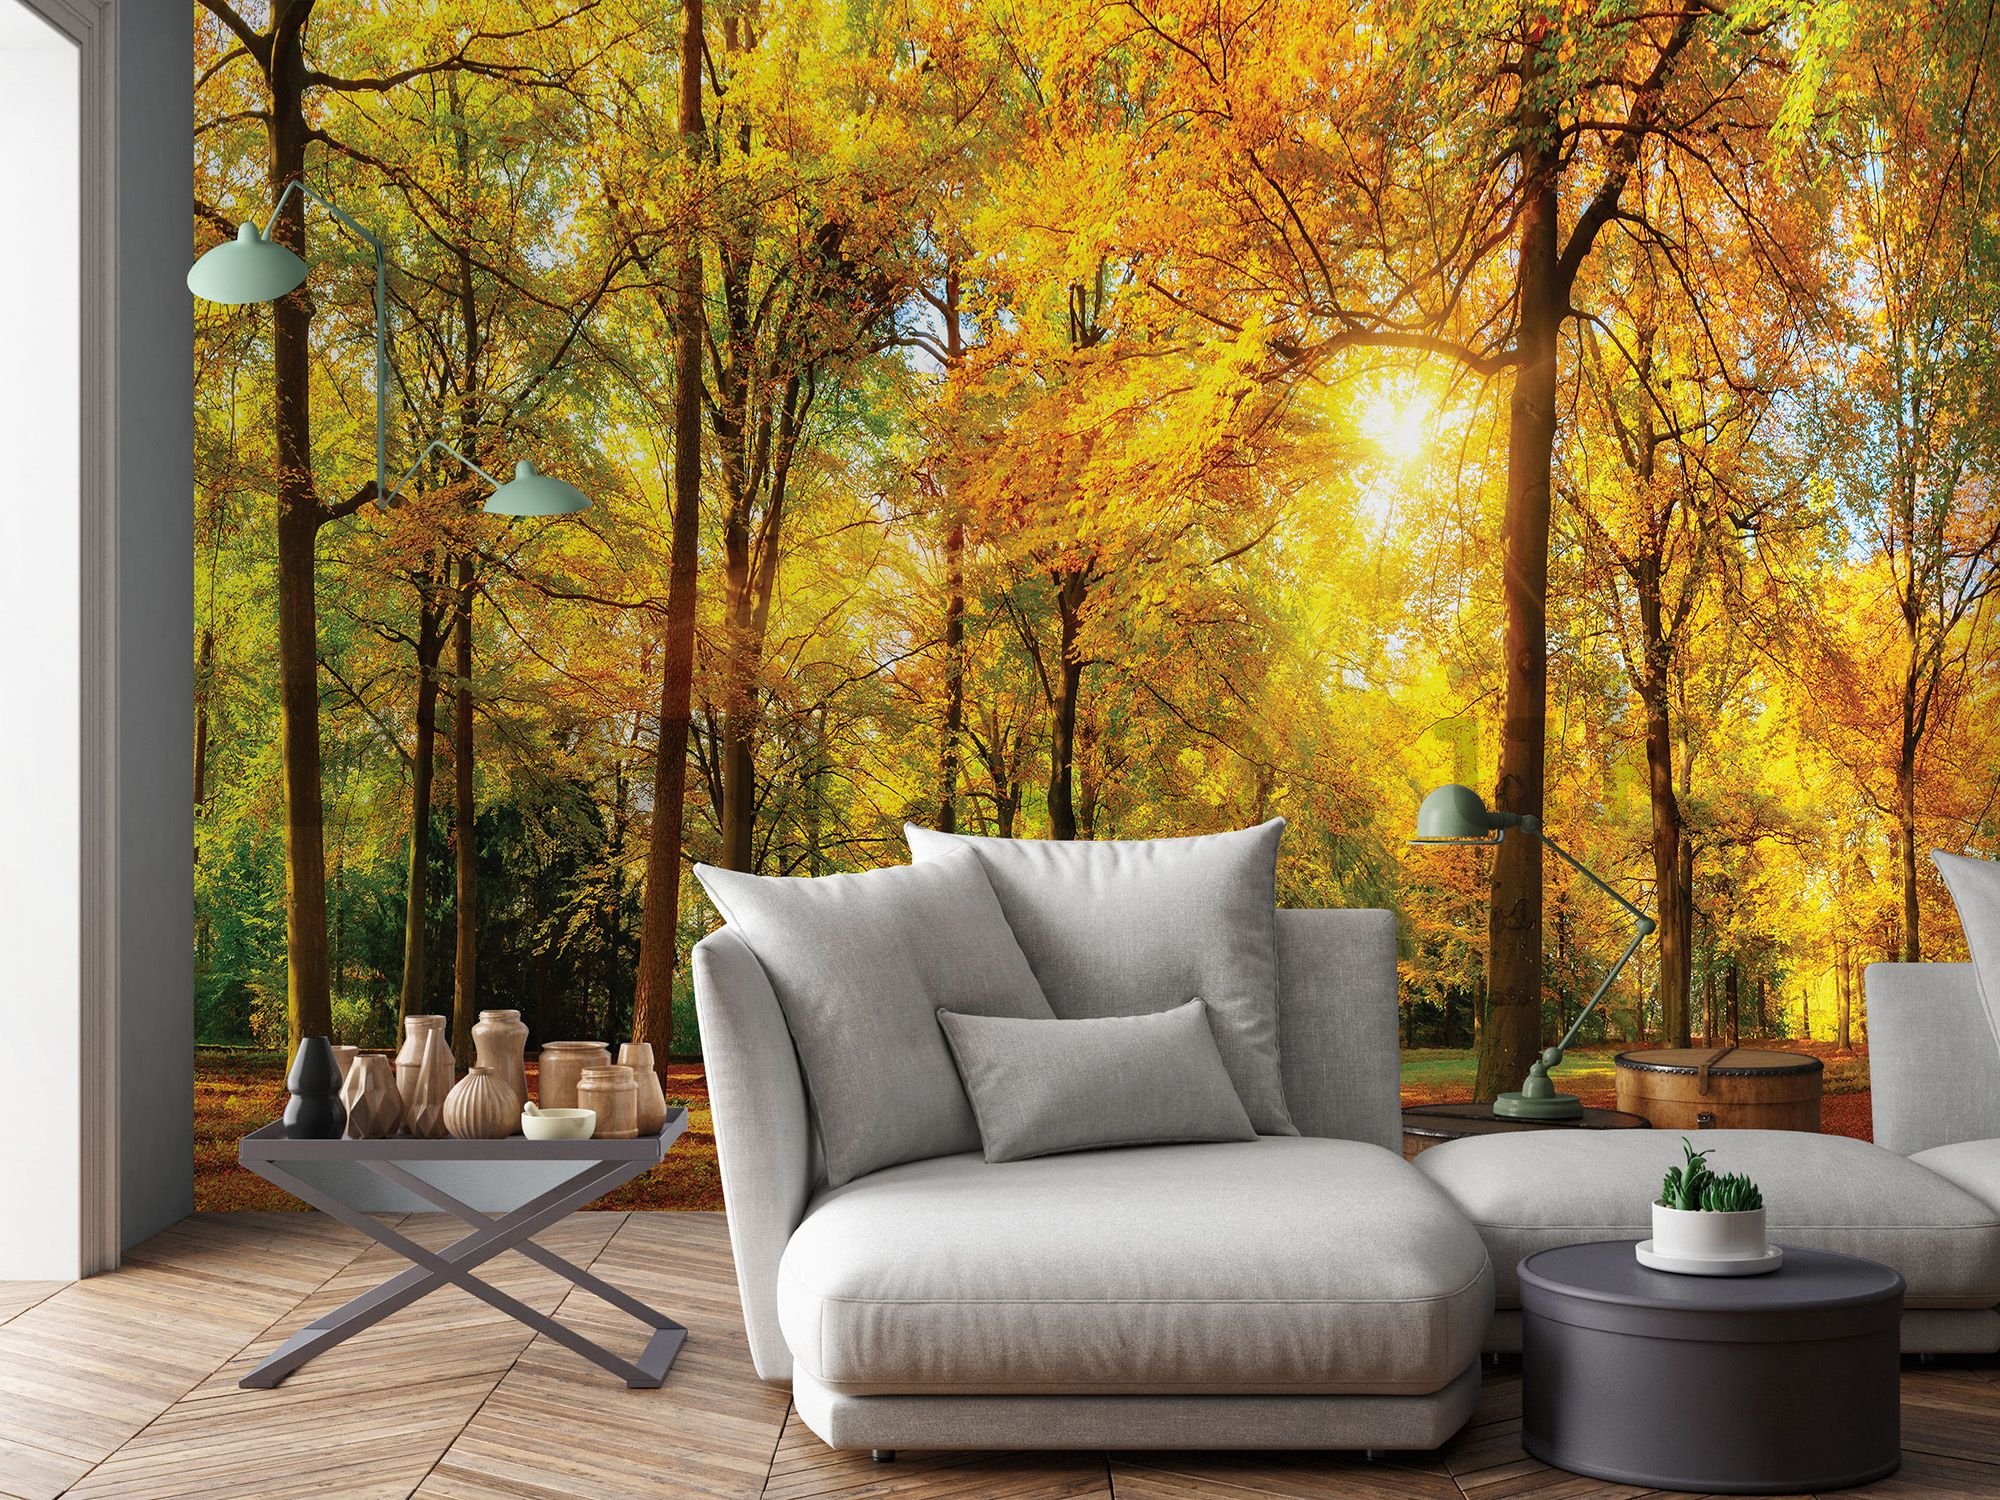 Wall mural: Fallen leaves in the forest - 184x254 cm